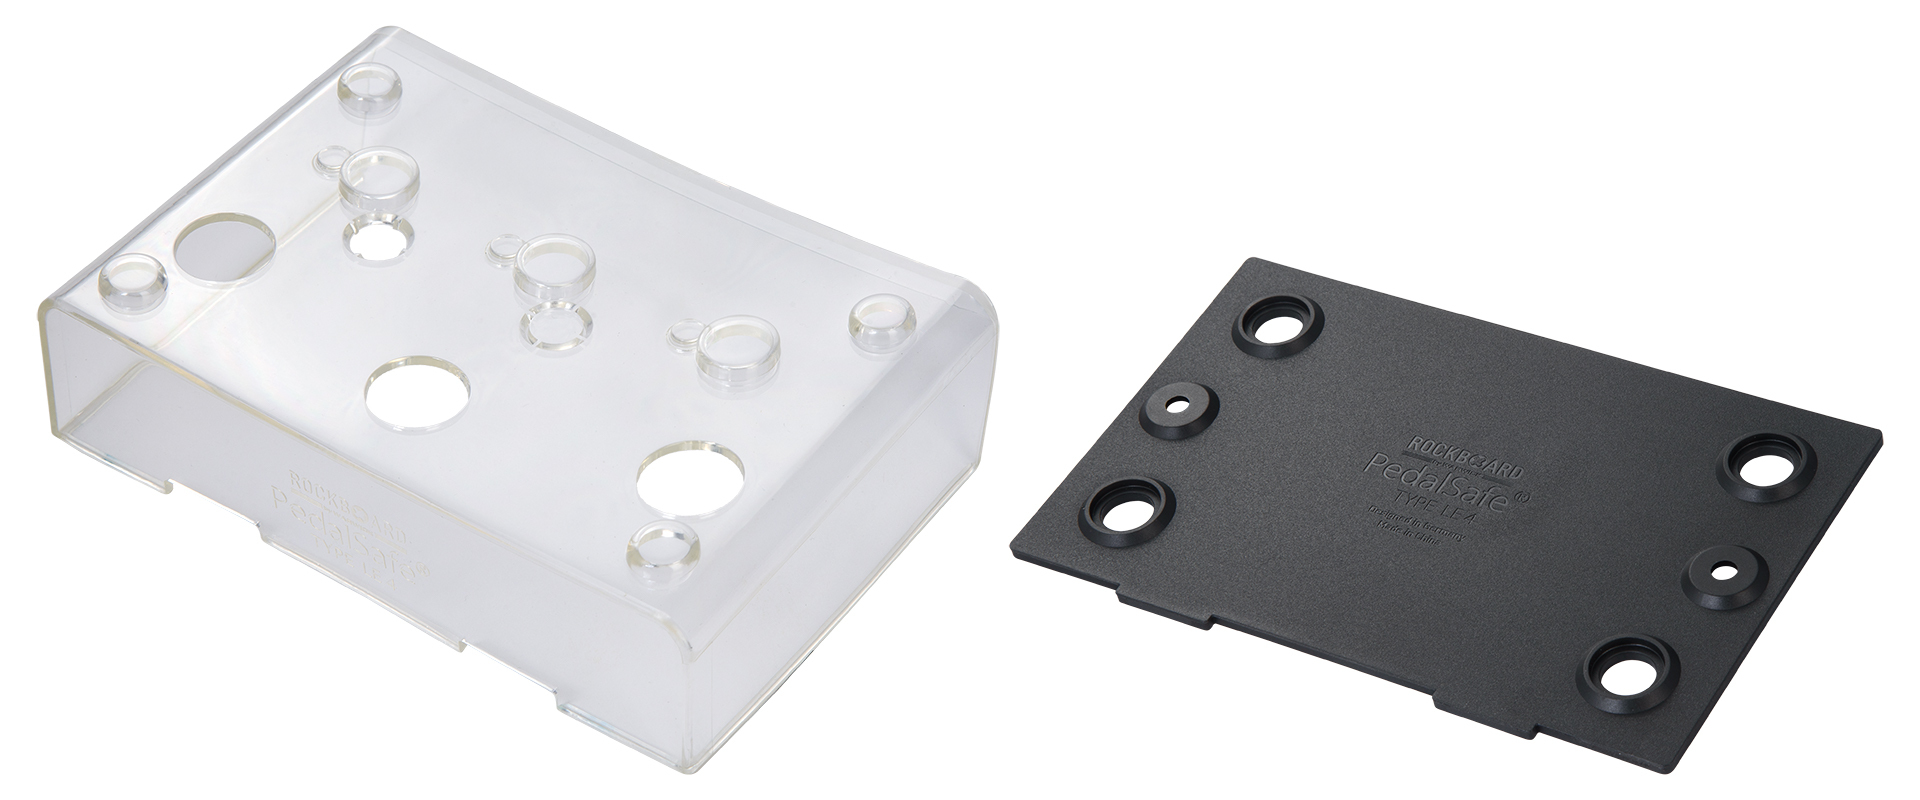 RockBoard PedalSafe Type LE4 - Protective Cover and Universal Mounting Plate for LEHLE Dual, LEHLE D.Loop, 3@1, 1@3 pedals